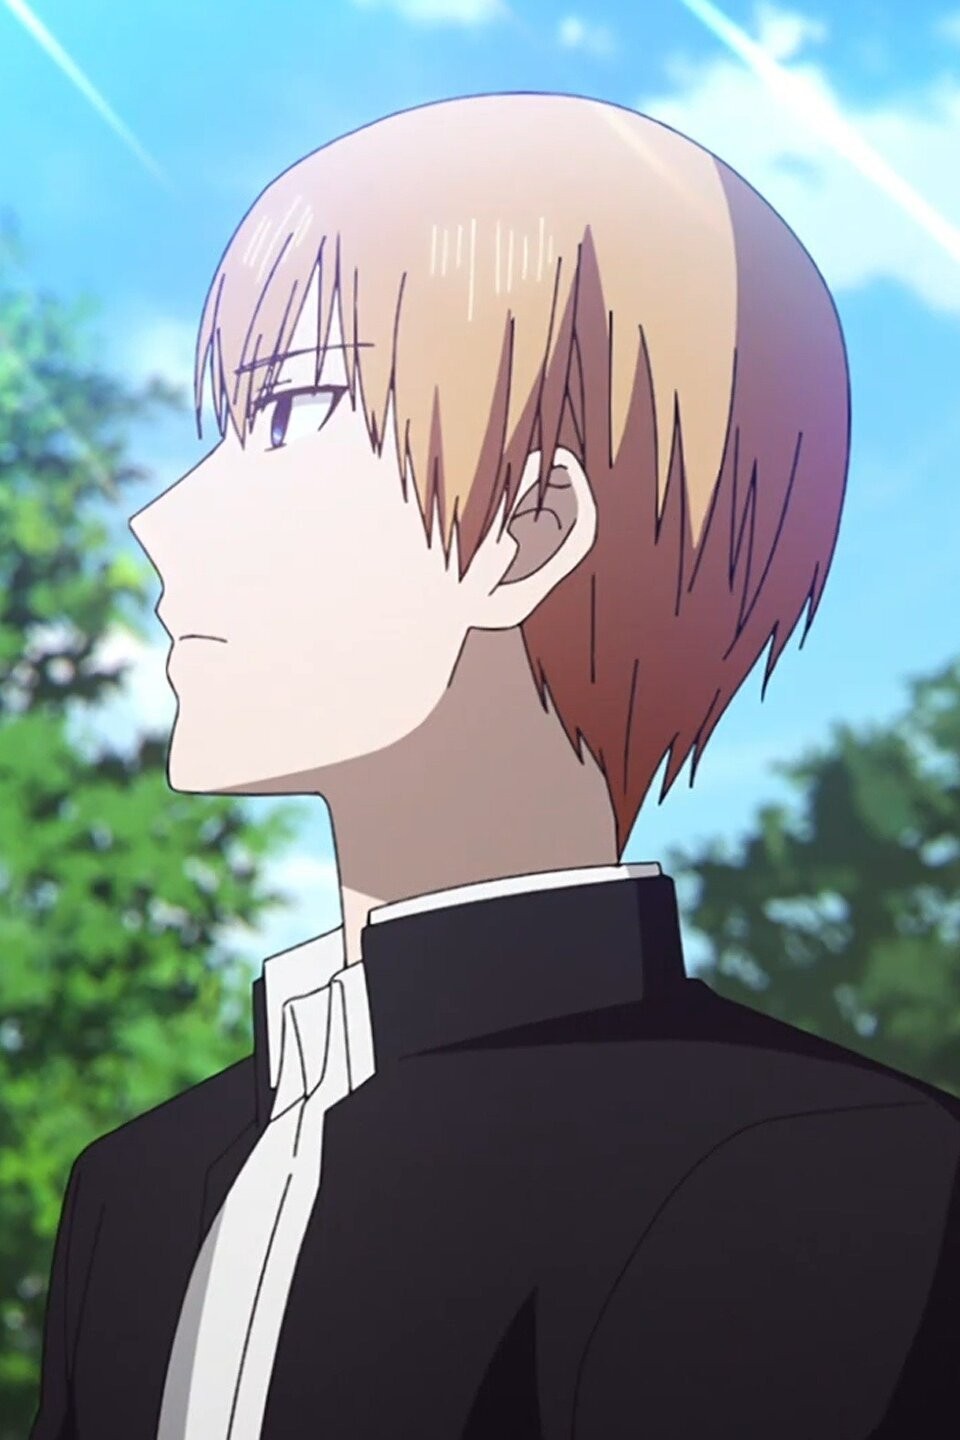 Kaguya Sama Love Is War Season 3 Episode 9 Review: Fruits Of Our Labour